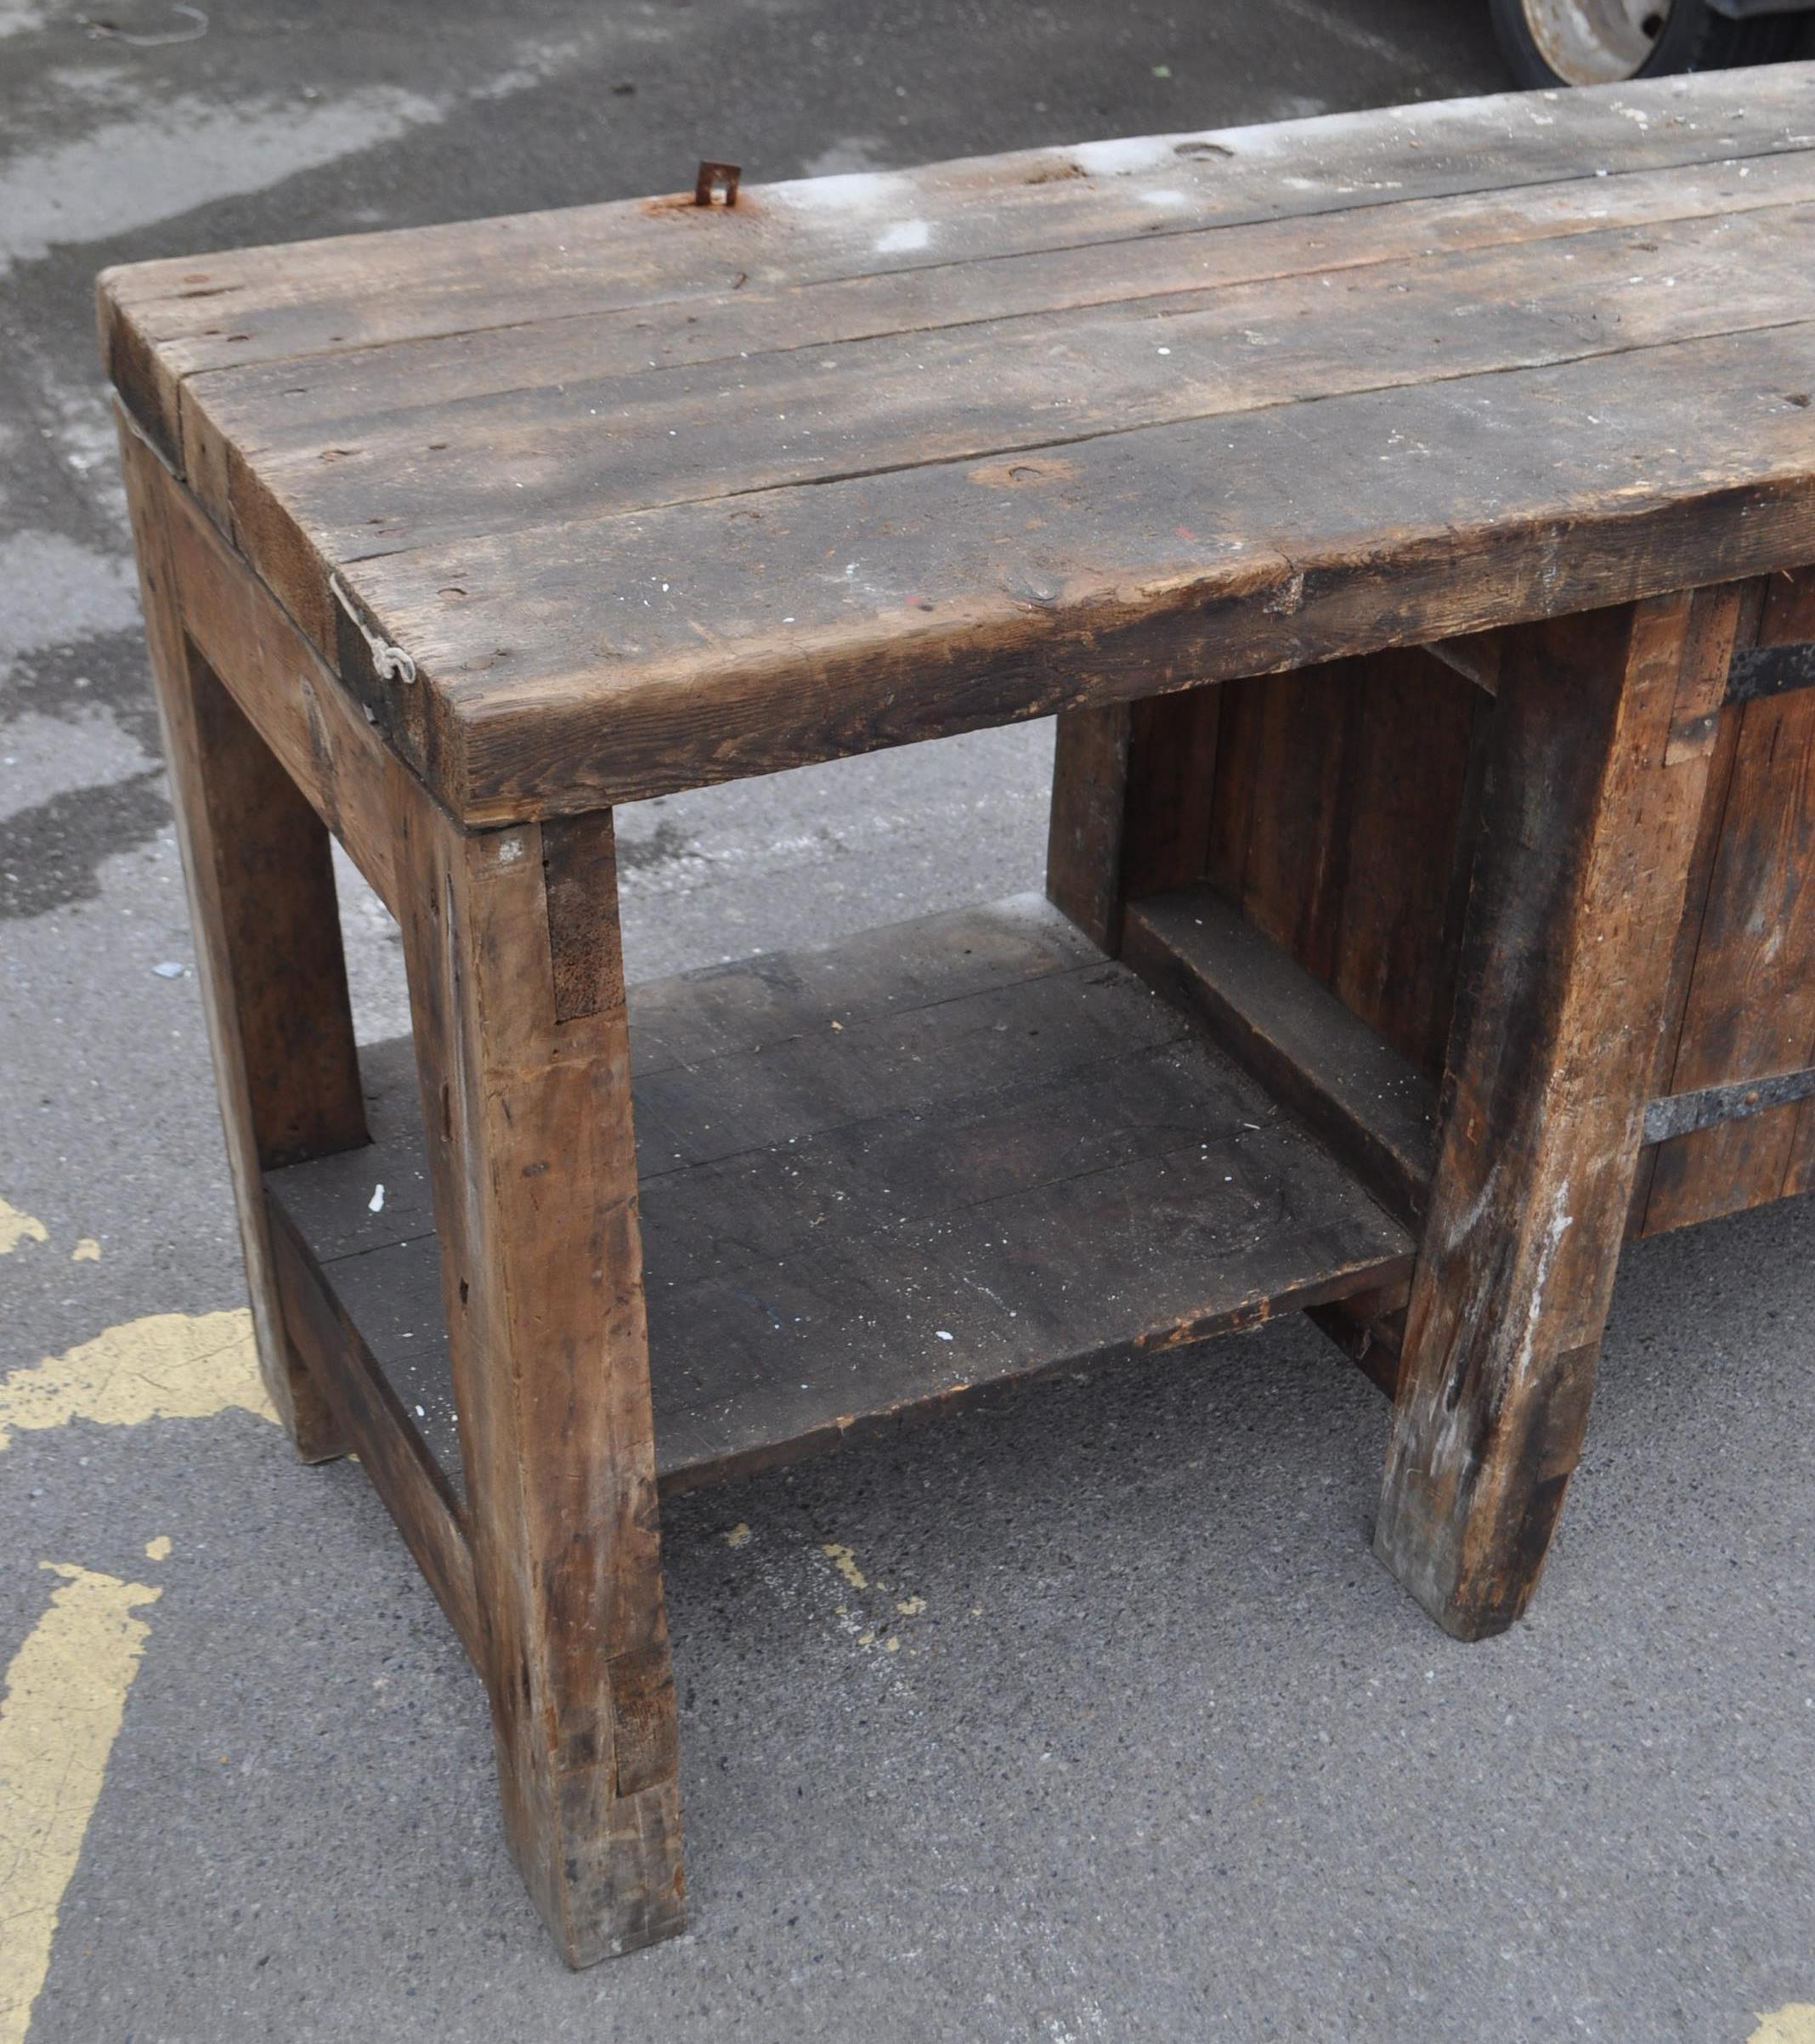 VINTAGE 20TH CENTURY LARGE INDUSTRIAL FACTORY GARAGE TABLE - Image 3 of 6